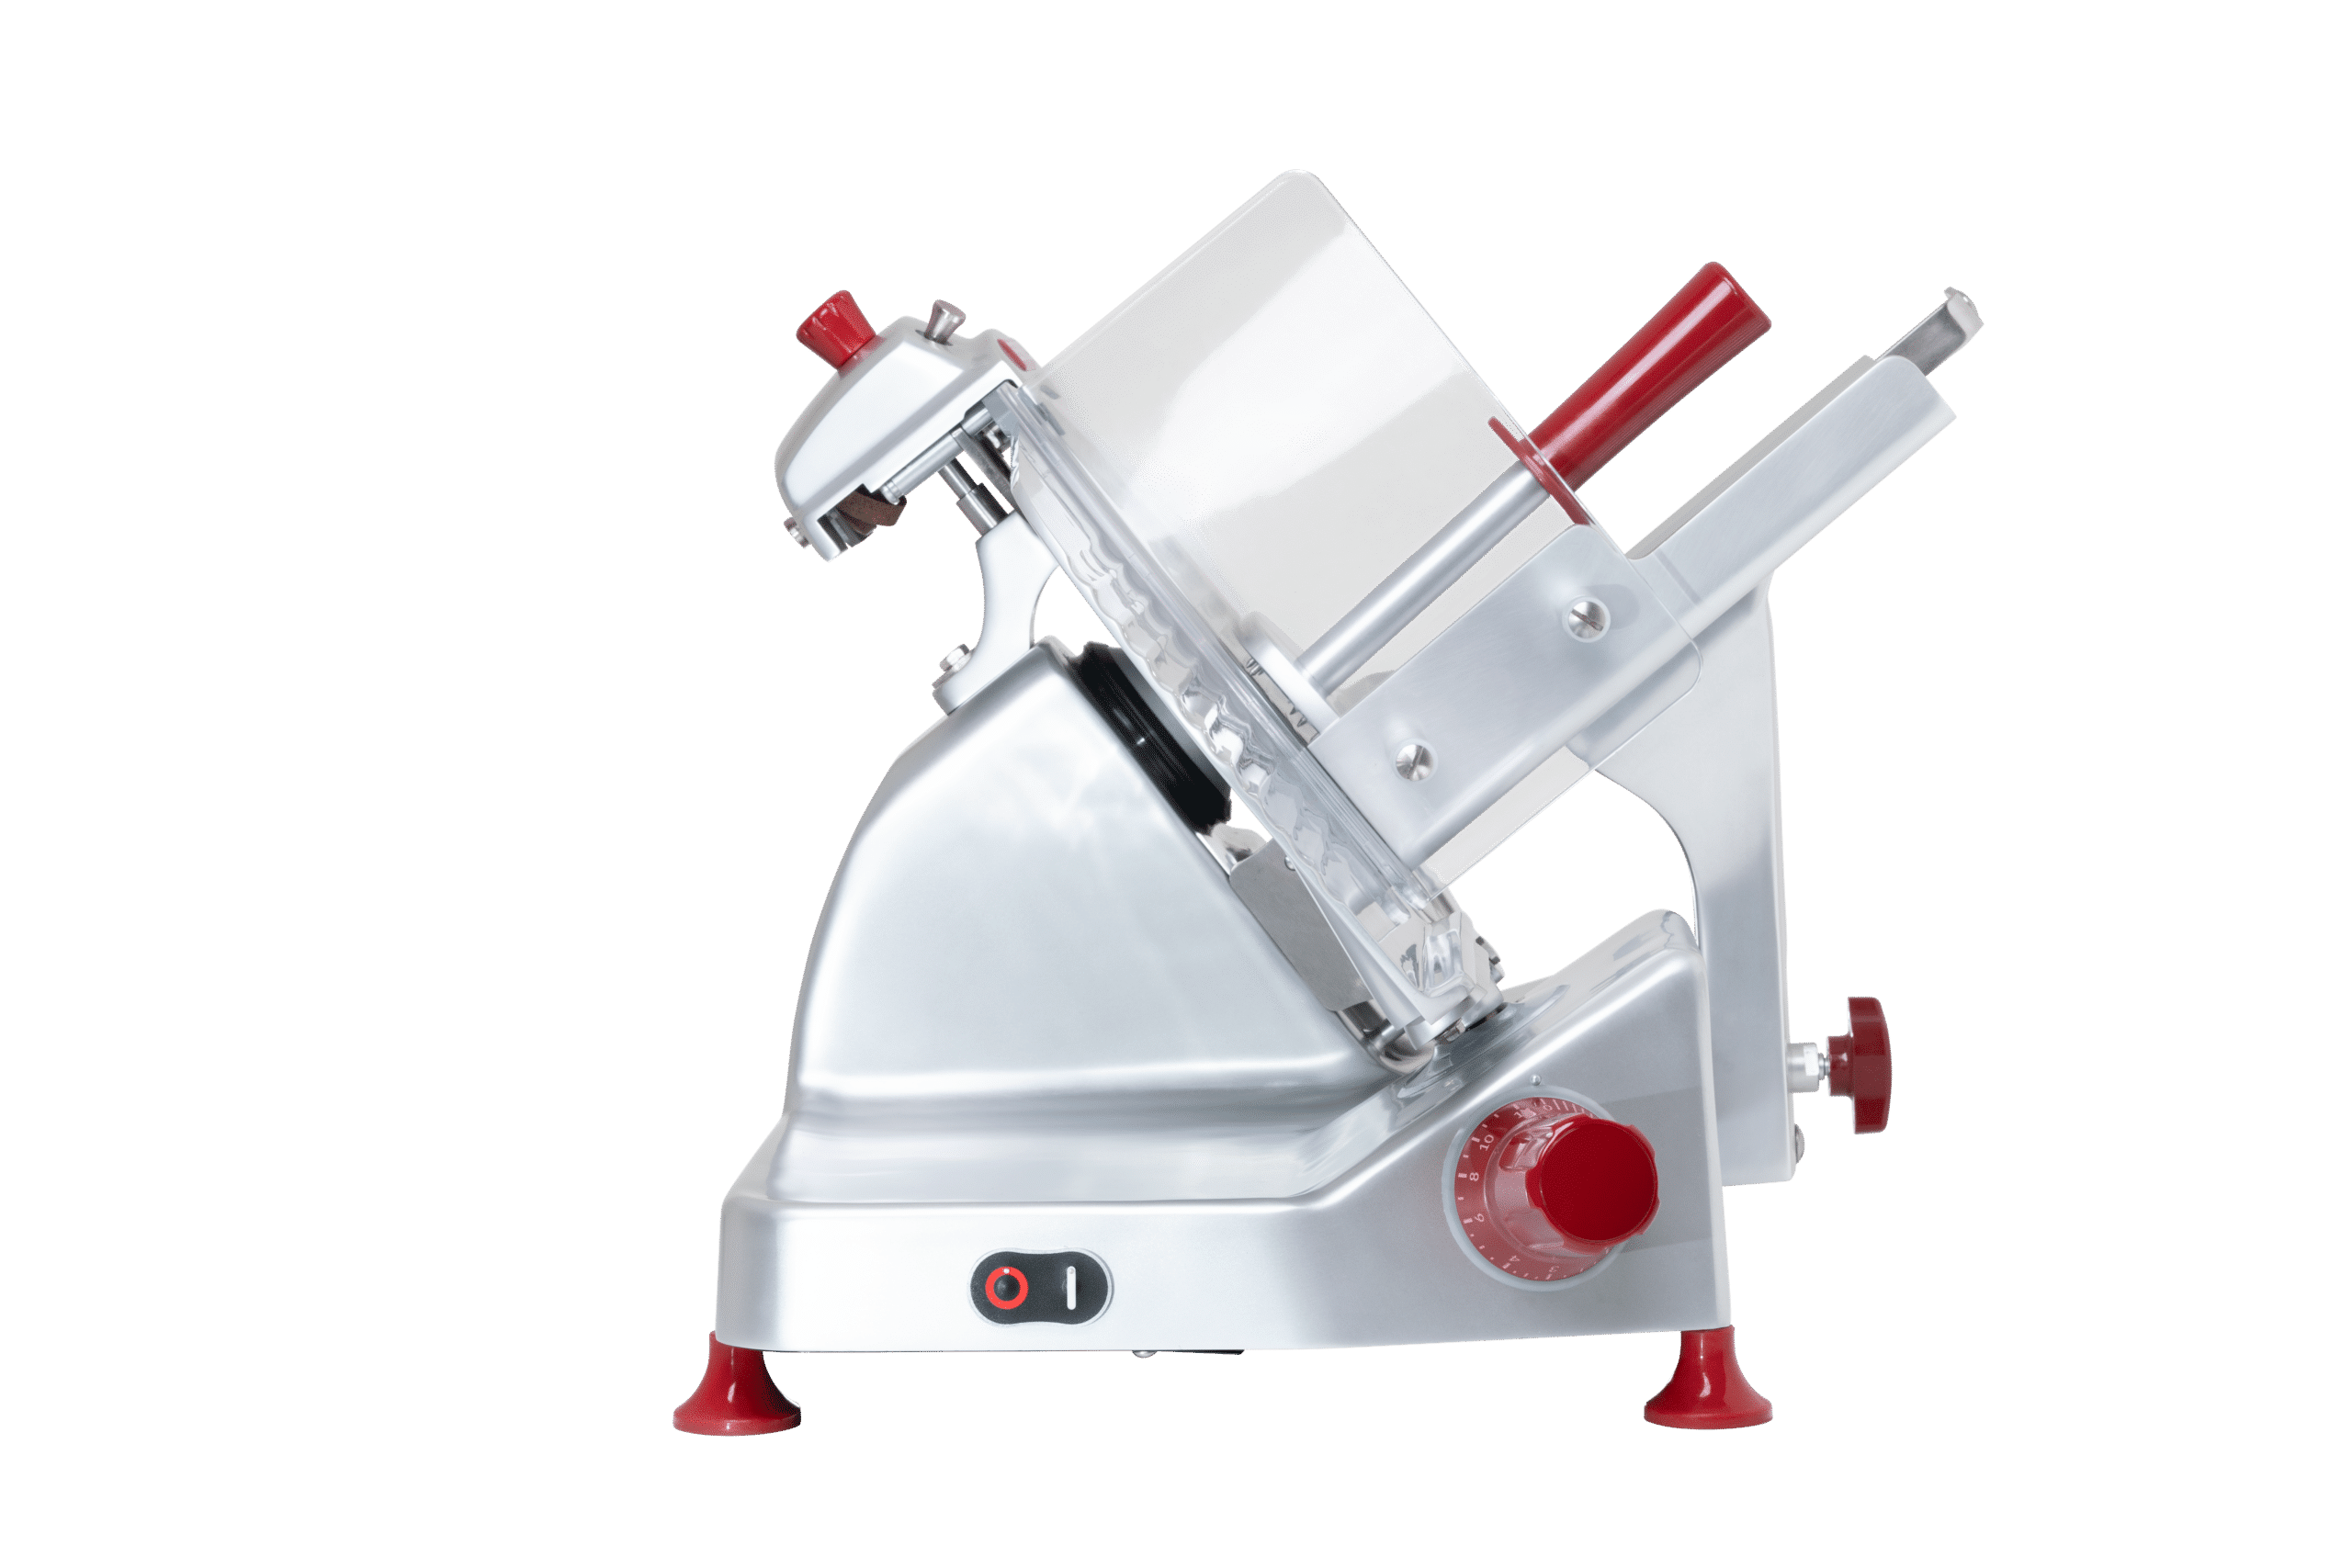 The newest electric gravity feed slicer, Pro Line XS30, great slicing performance, an easy-to-clean design, and high-performance materials